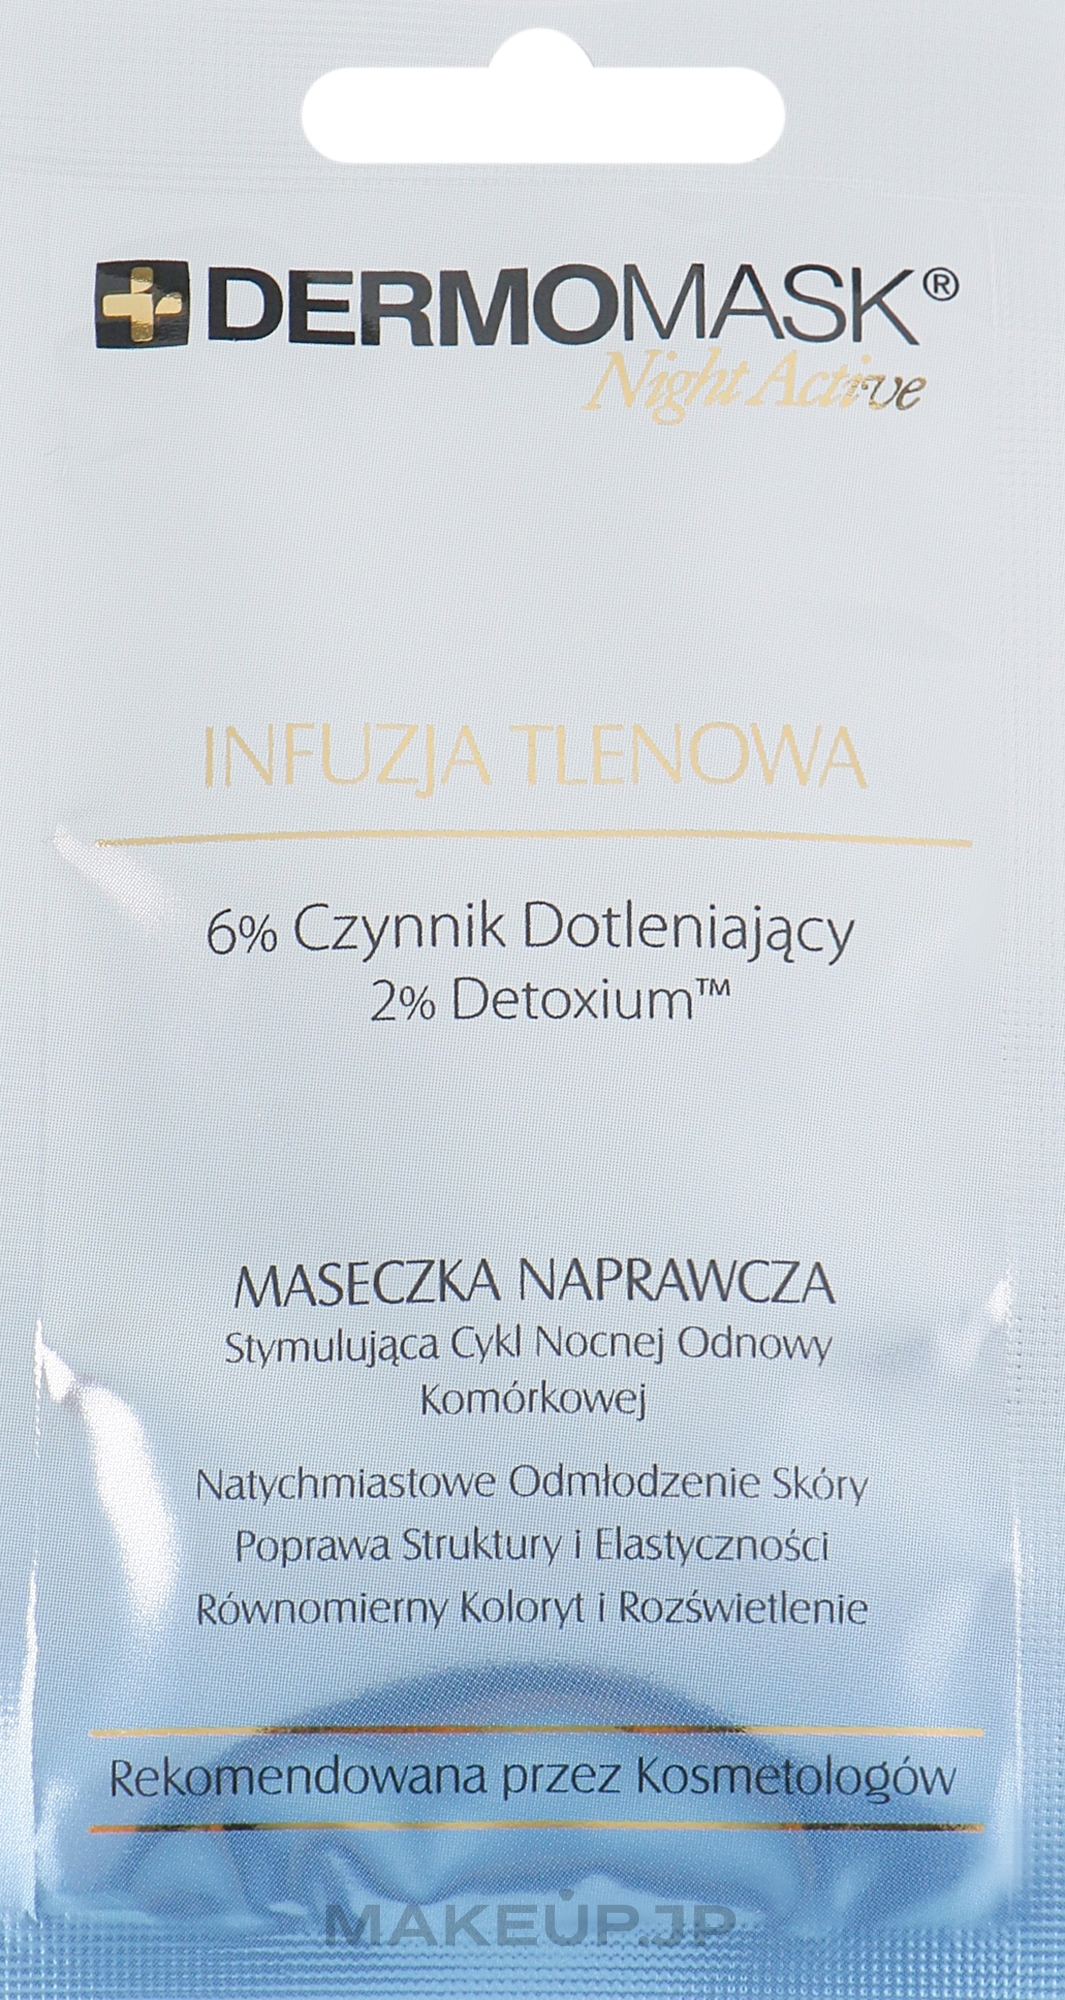 Night Face Mask 'Oxygen Infusion' - L'biotica Dermomask Night Active Oxygen Infusion — photo 12 ml